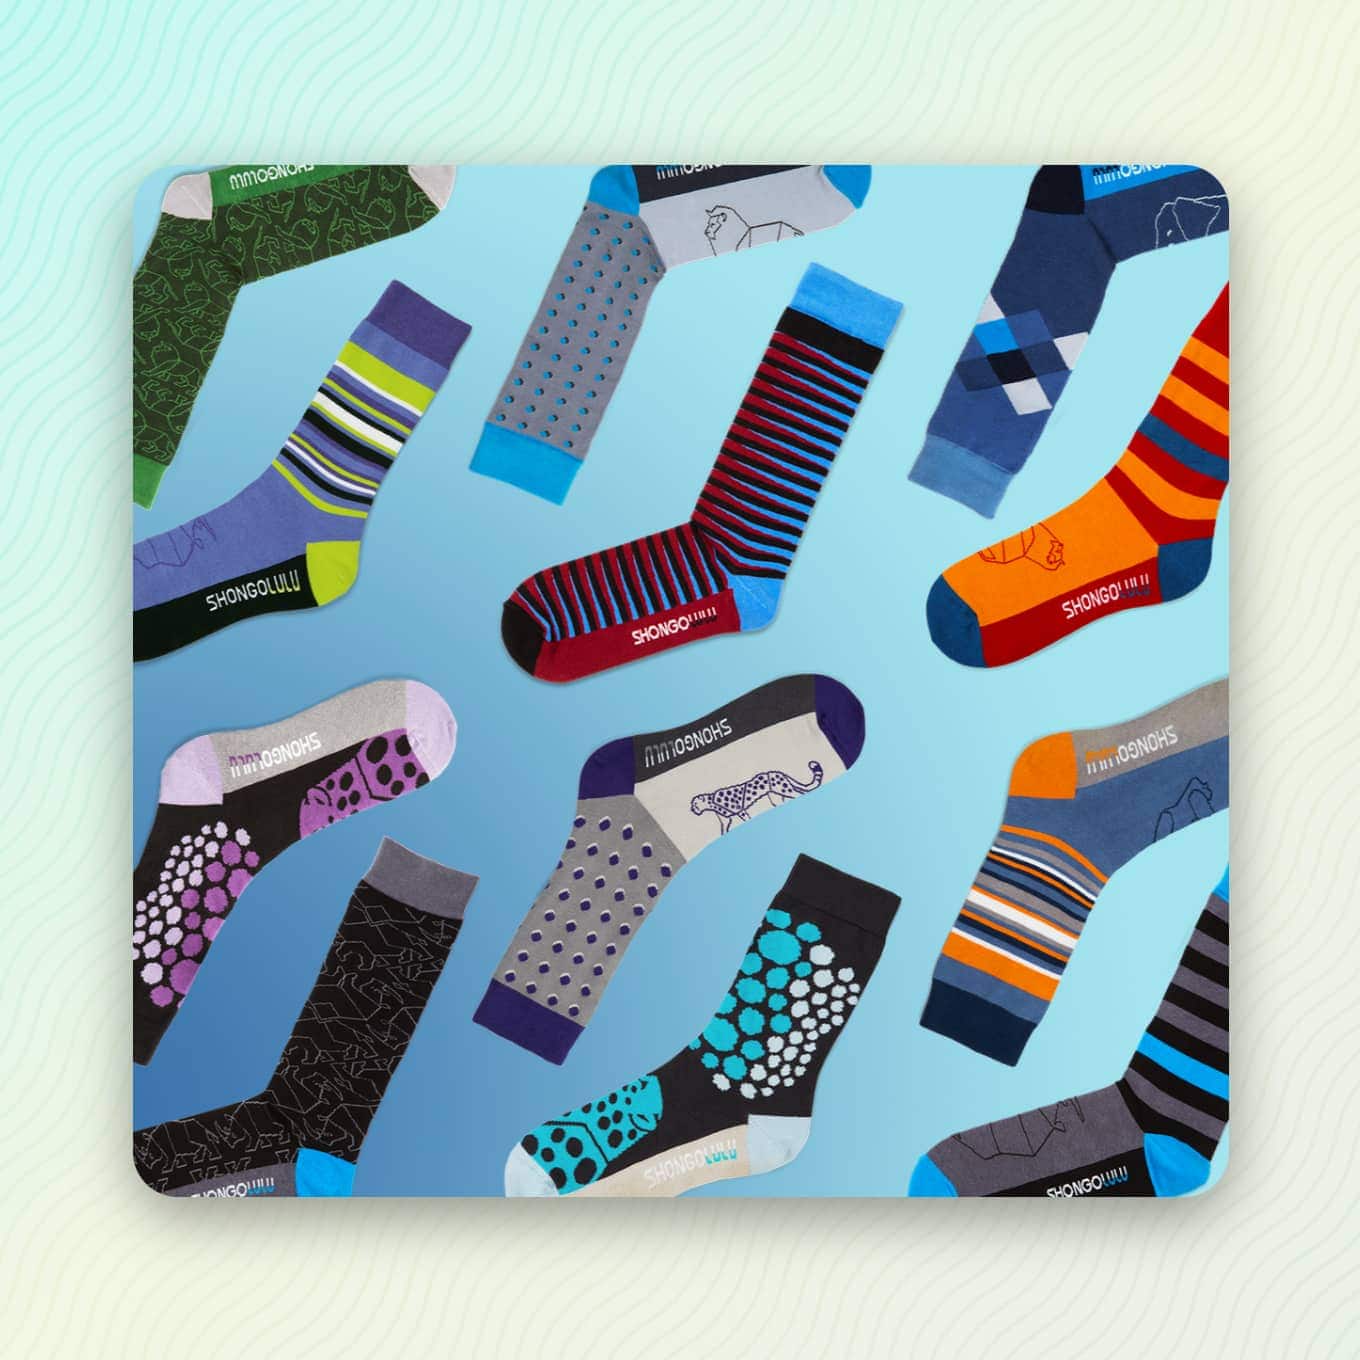 Several examples of tall socks from Shongolulu